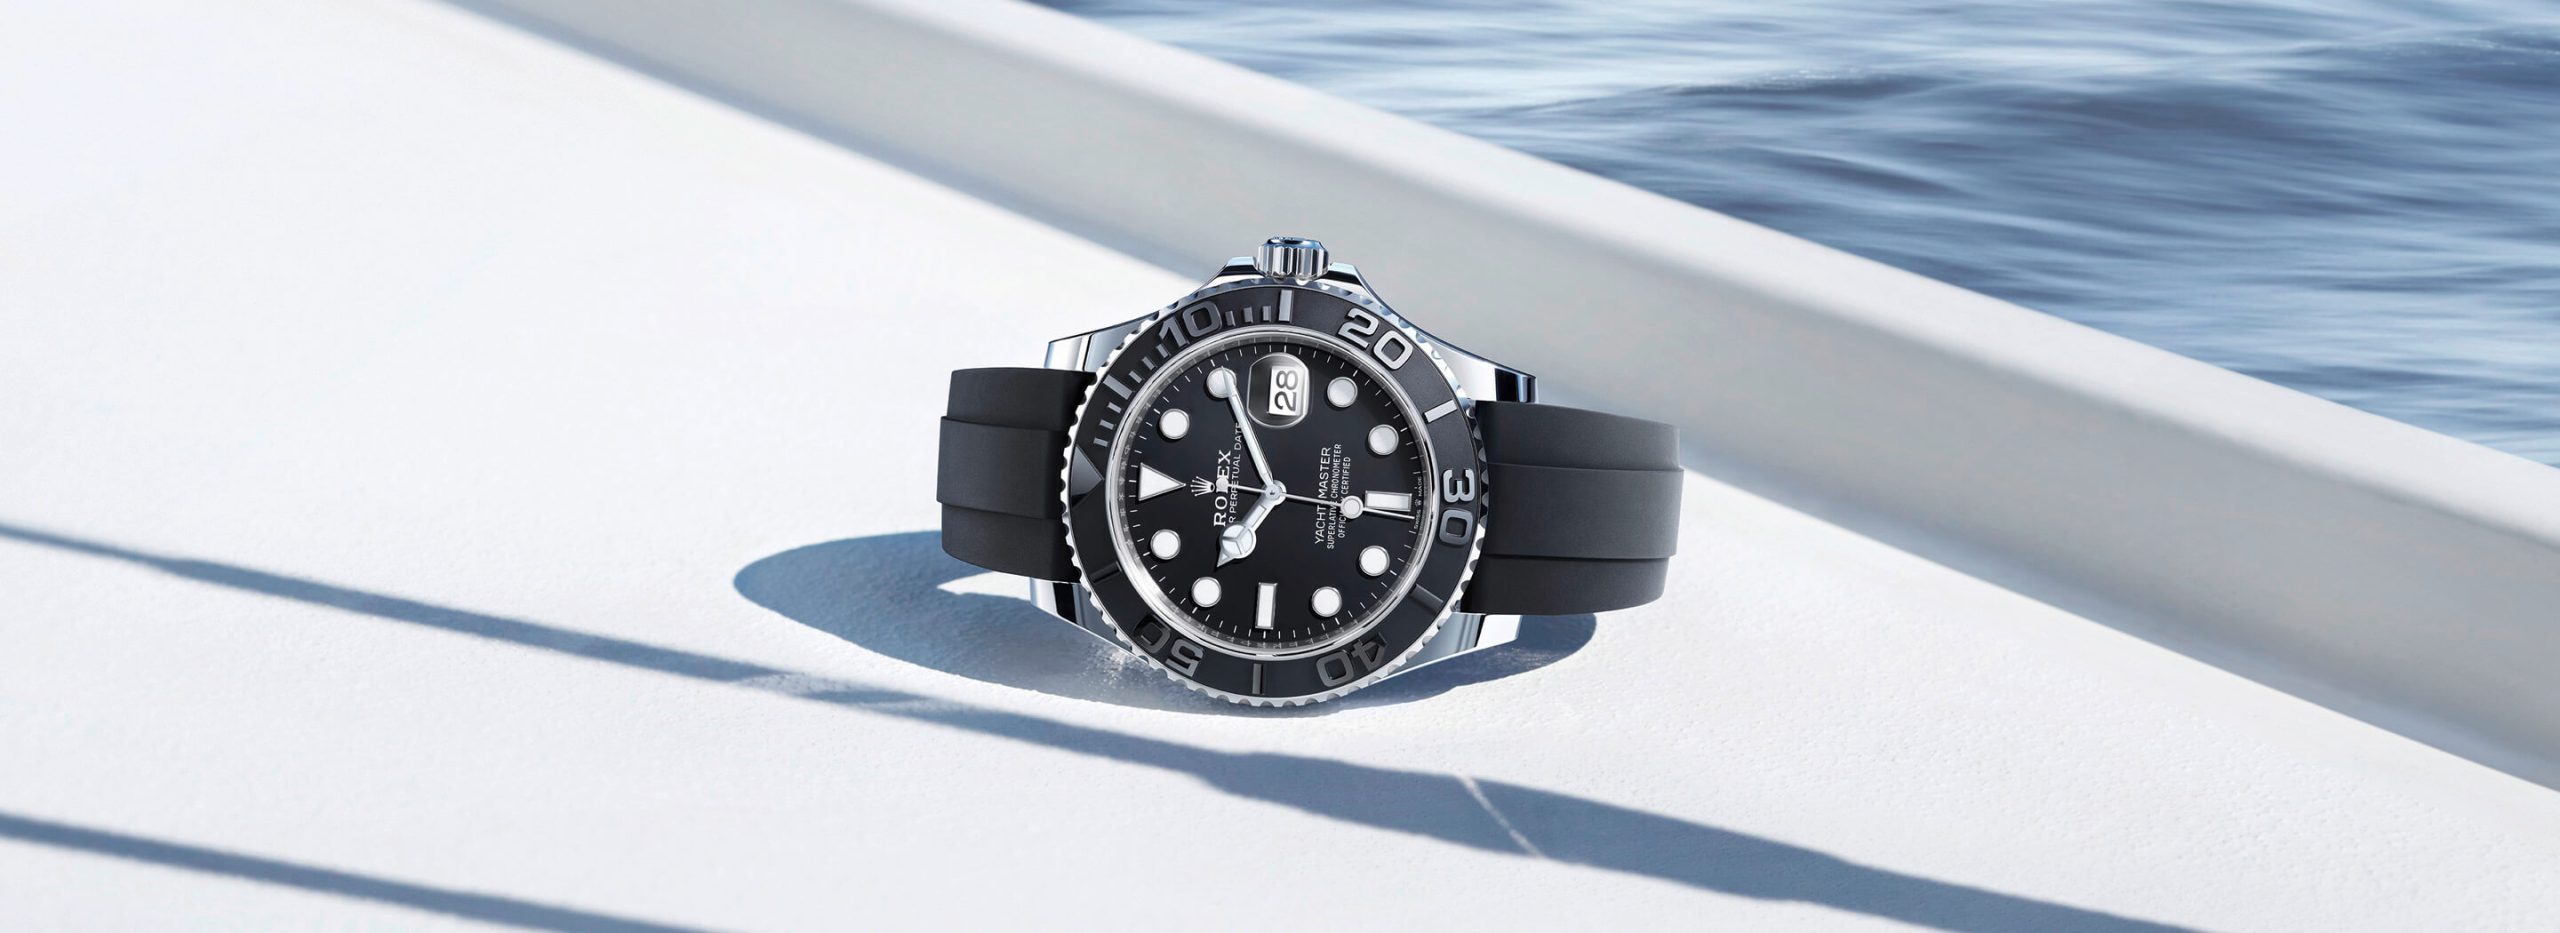 rolex yacht master watches - global watch company